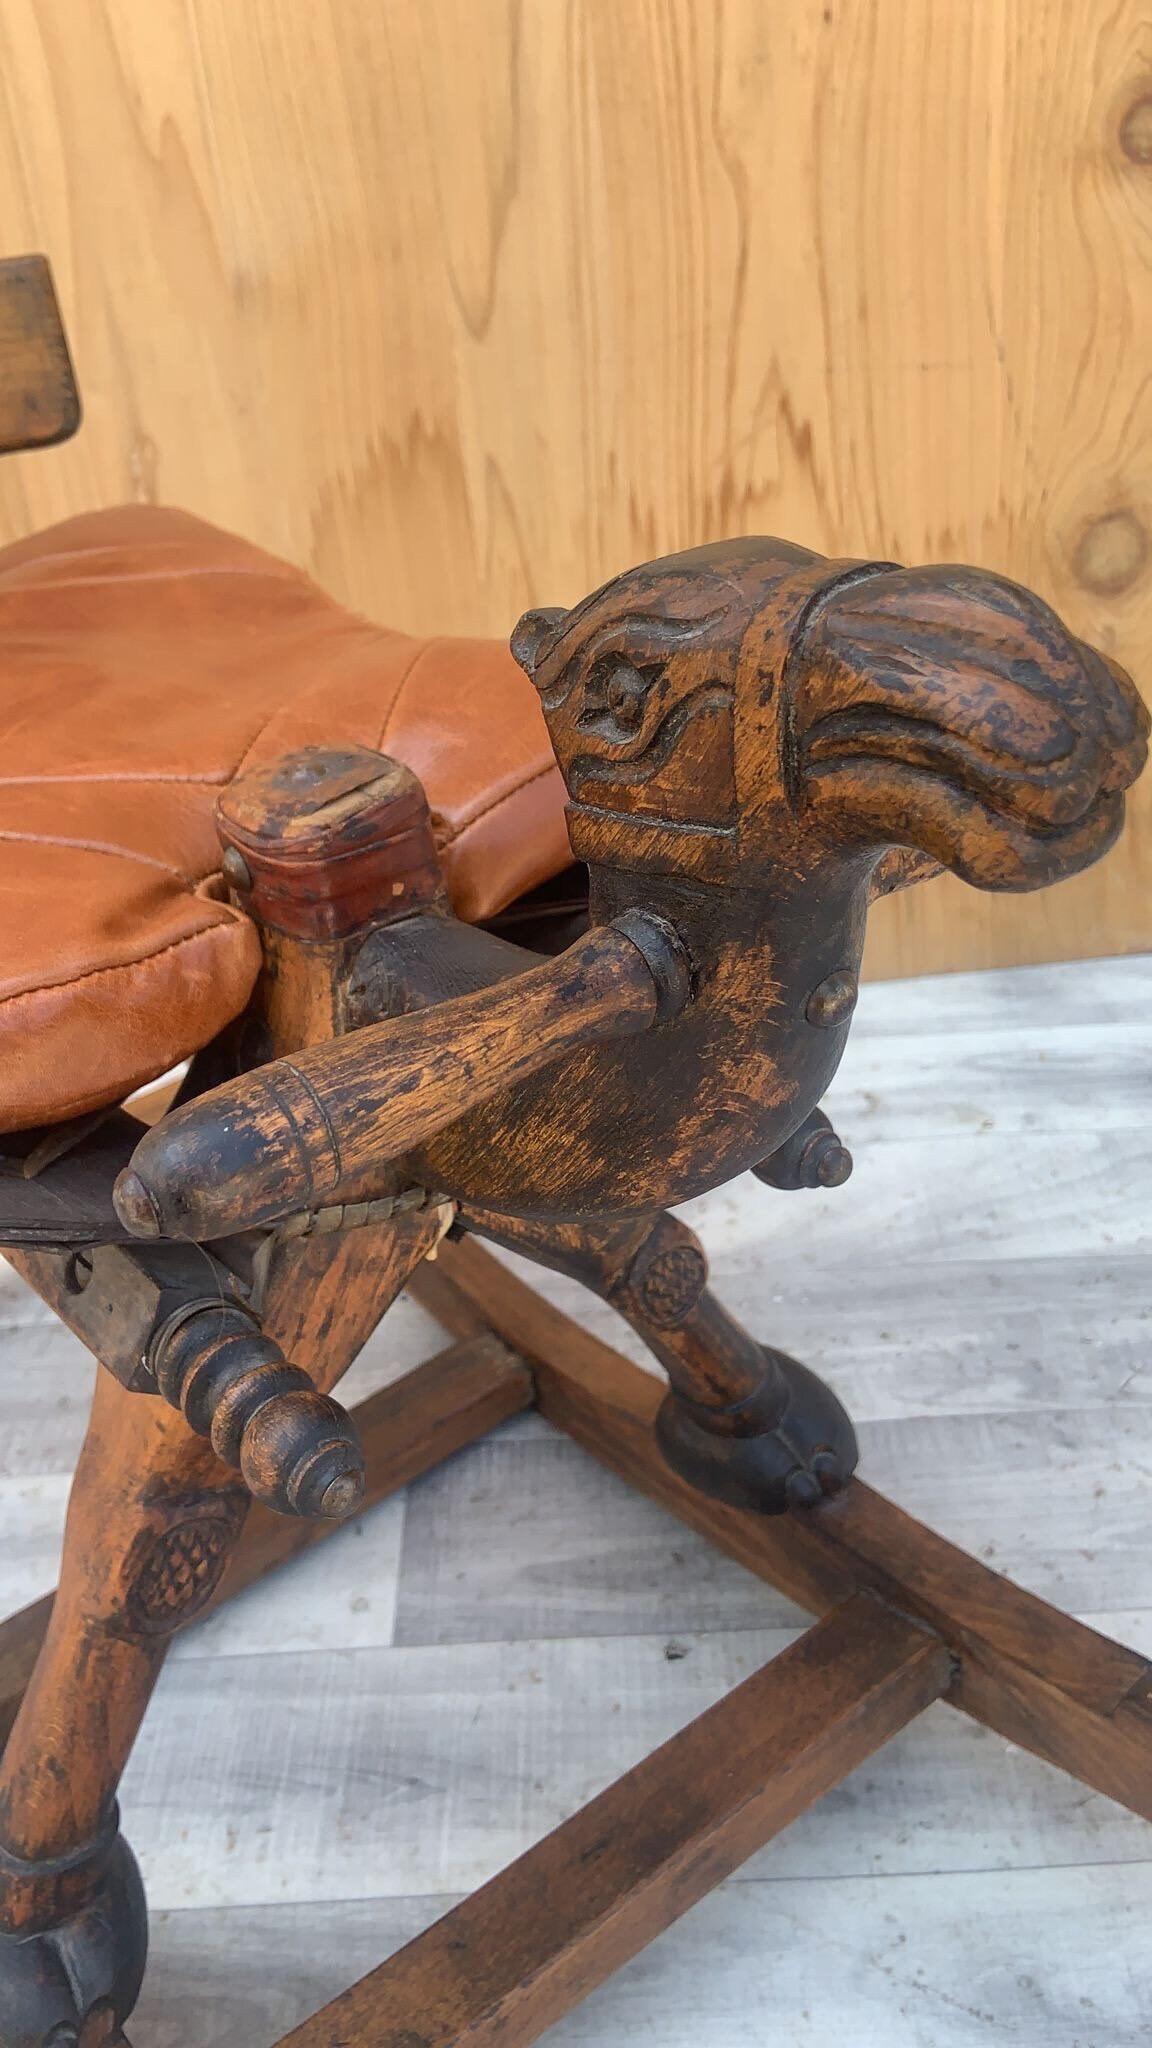 Islamic Antique Hand Carved Turkish Wood Camel Rocker with Leather Cushion Seat For Sale